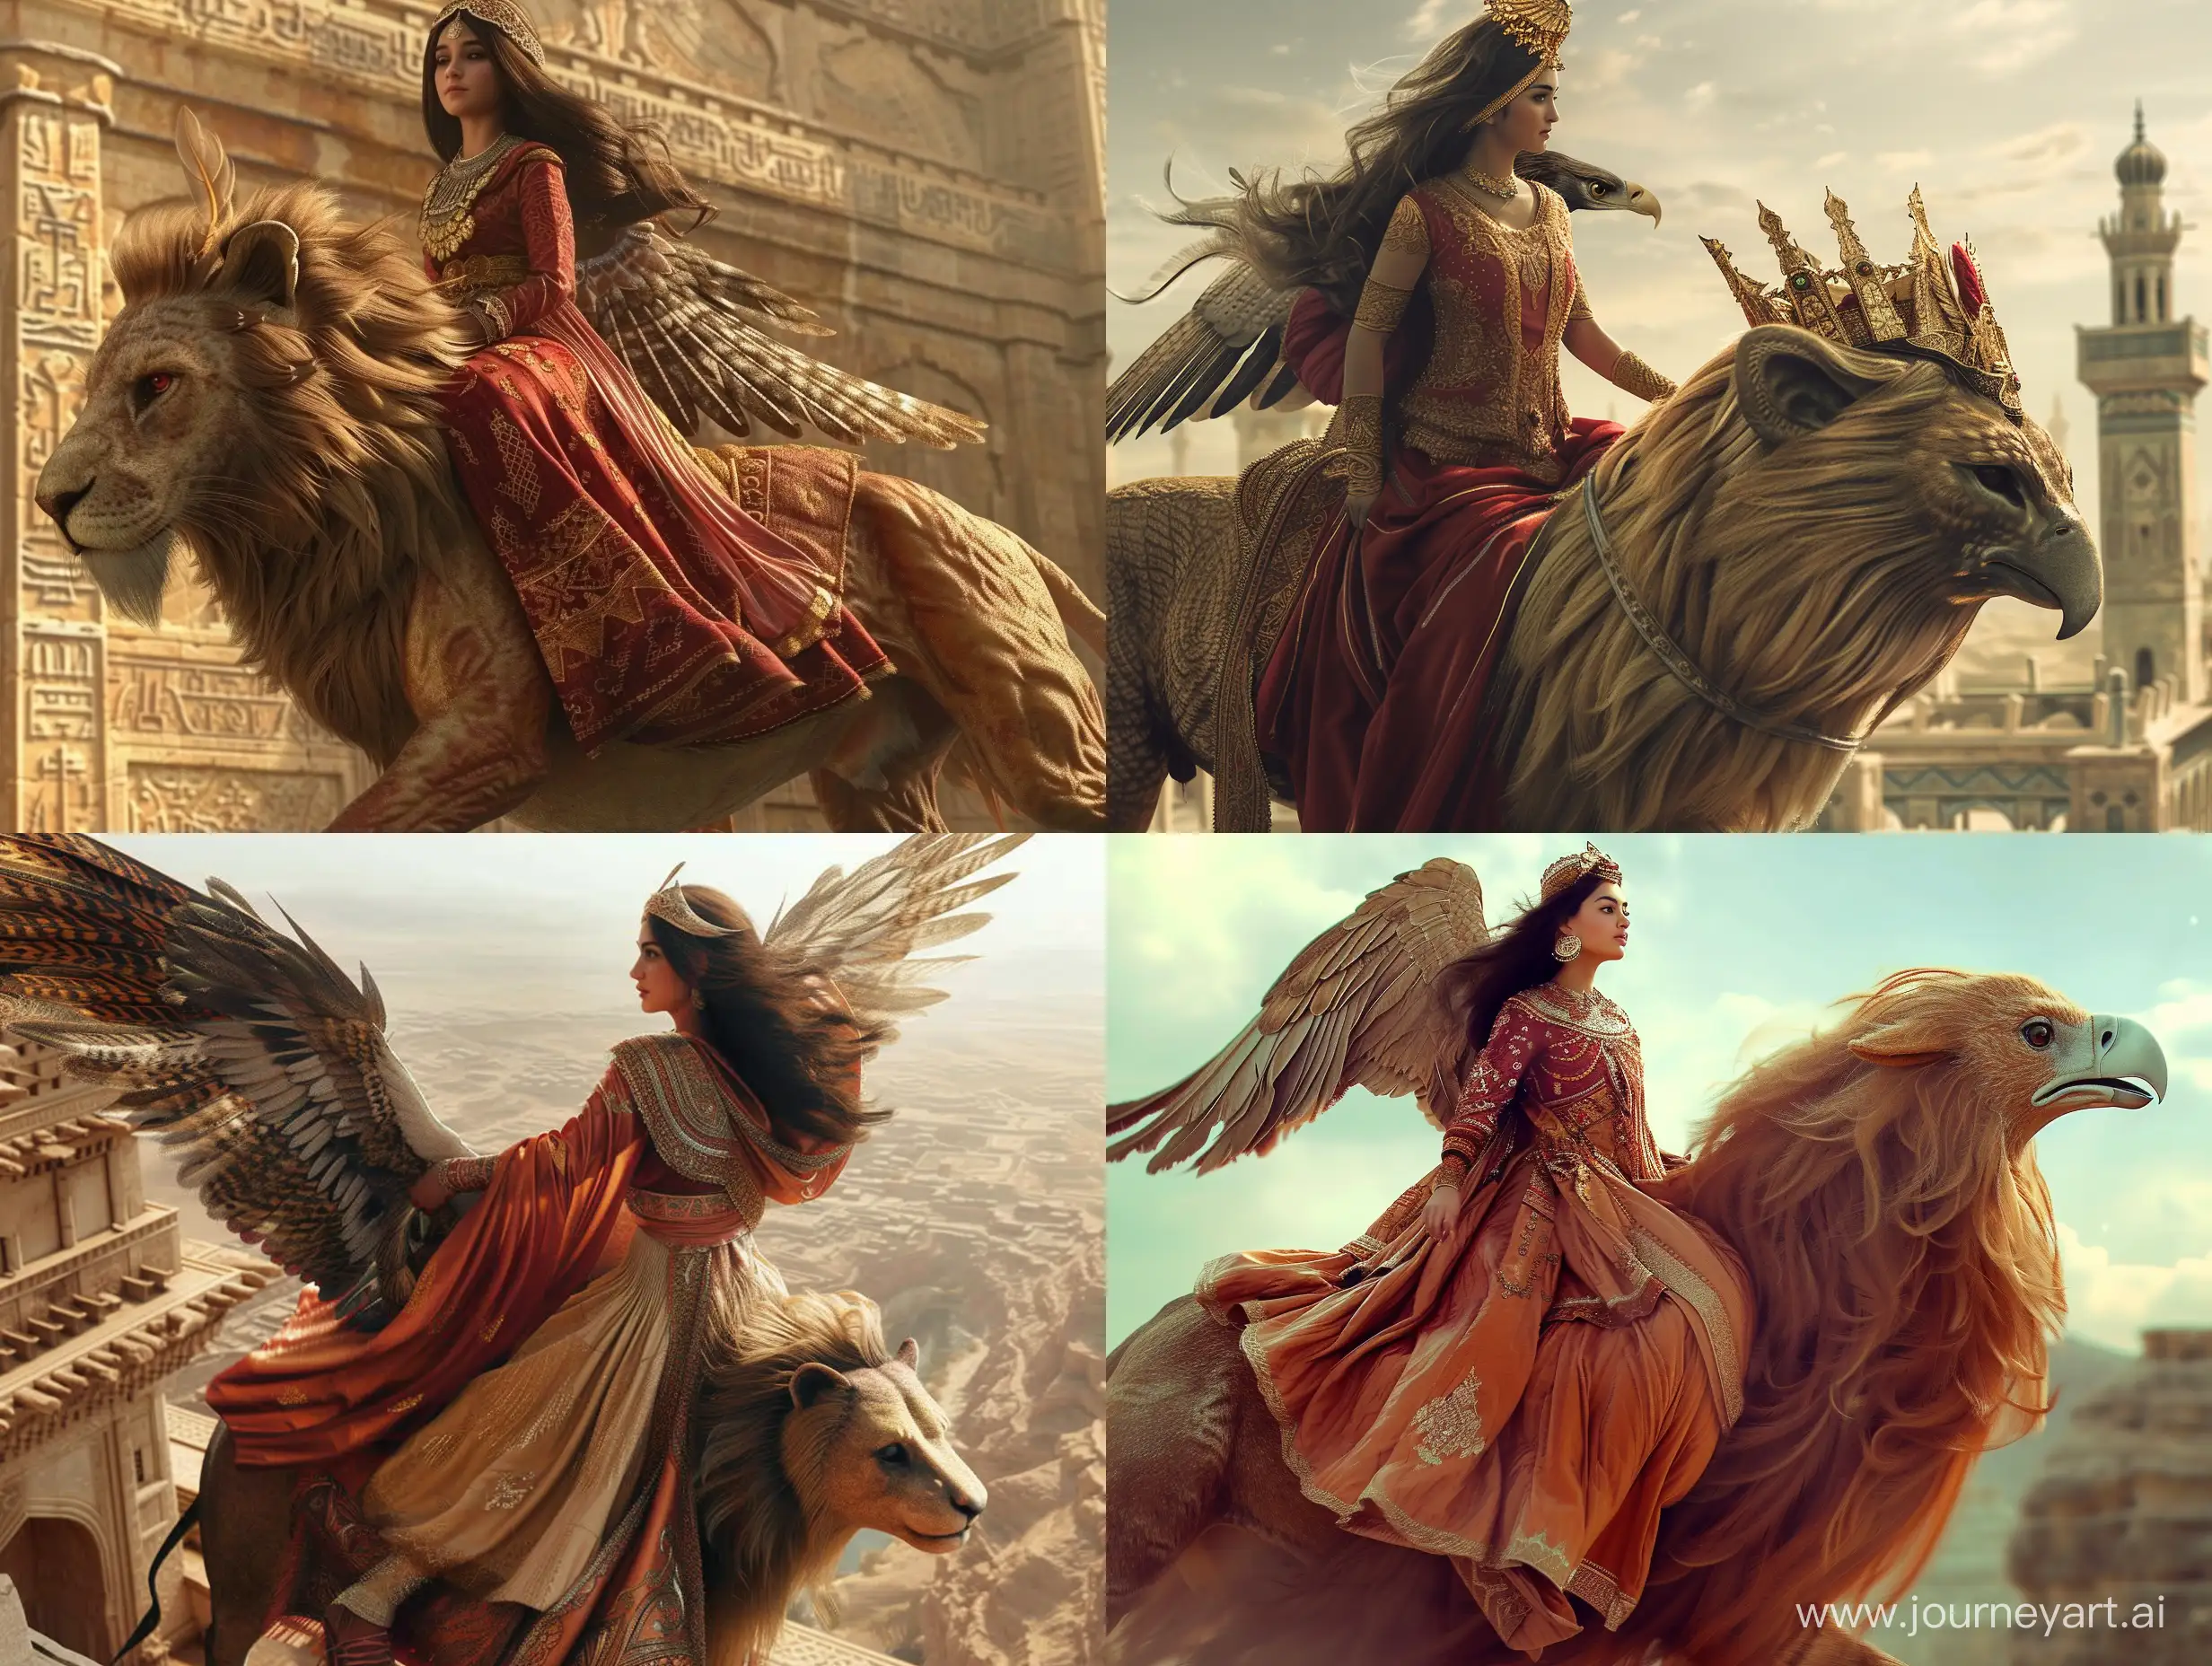 The beautiful Persian princess is riding on the back of an animal whose head is like an eagle's head and the body of that animal is like the body of a lion. in an ancient civilization, cinematic, epic realism,8K, highly detailed, bird's eye view. make a realistic photo 